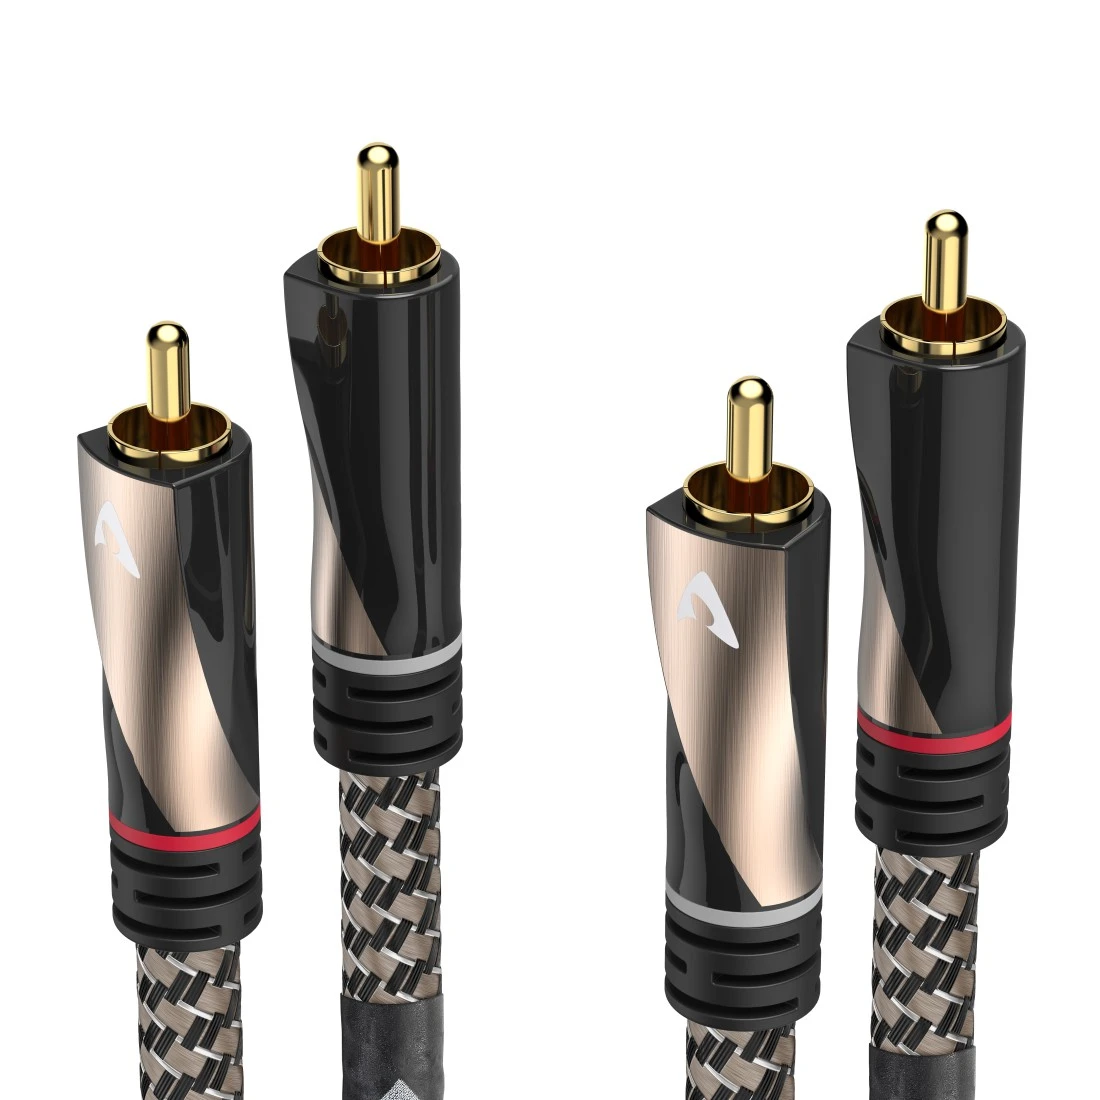 abx2 High-Res Image 2 - Avinity, Audio Cable, 2 RCA Plugs - 2 RCA Plugs, Fabric, gold-plated, 0.5 m